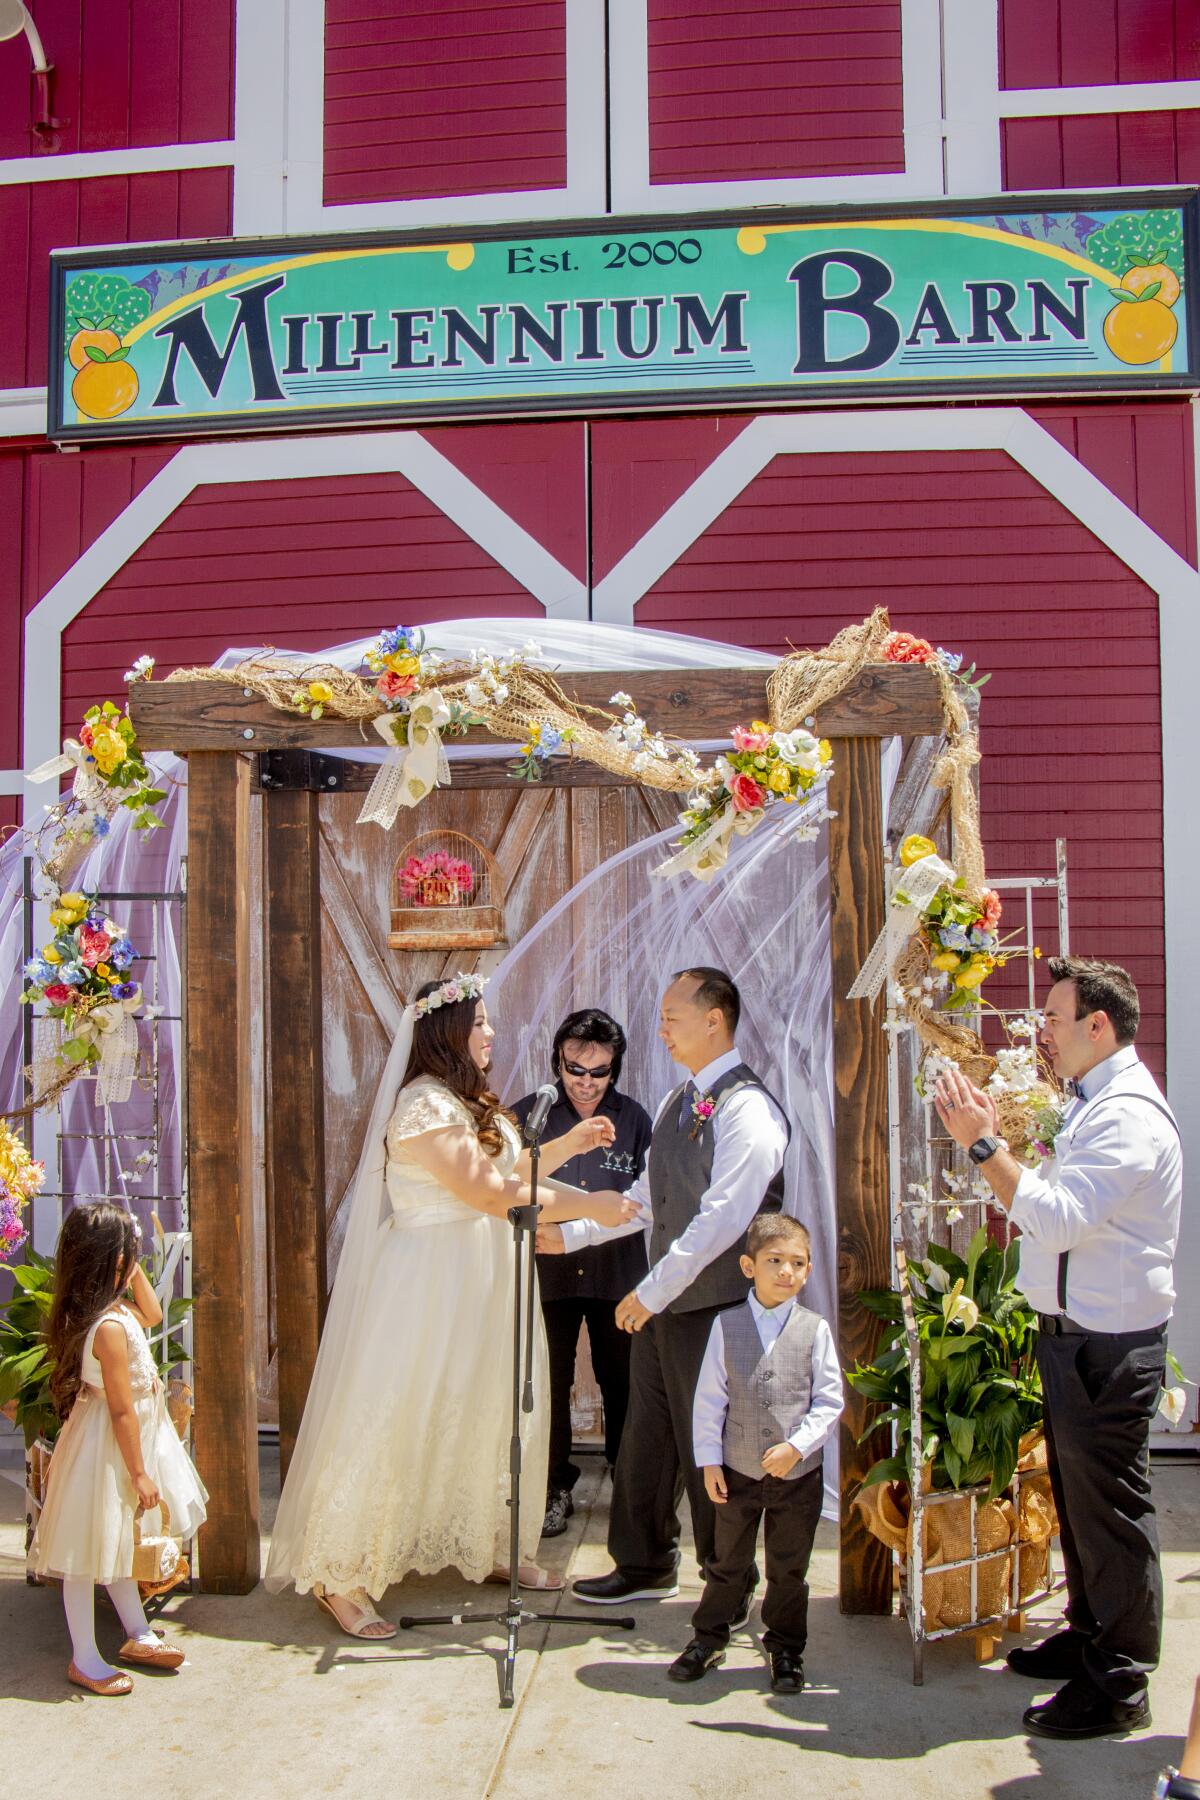 Minister Phil Shane of Universal Life Church presides at the wedding of Leslie Leong and Michael Nguyen at the Millennium Barn. To their right is ring bearer Christopher Bran.